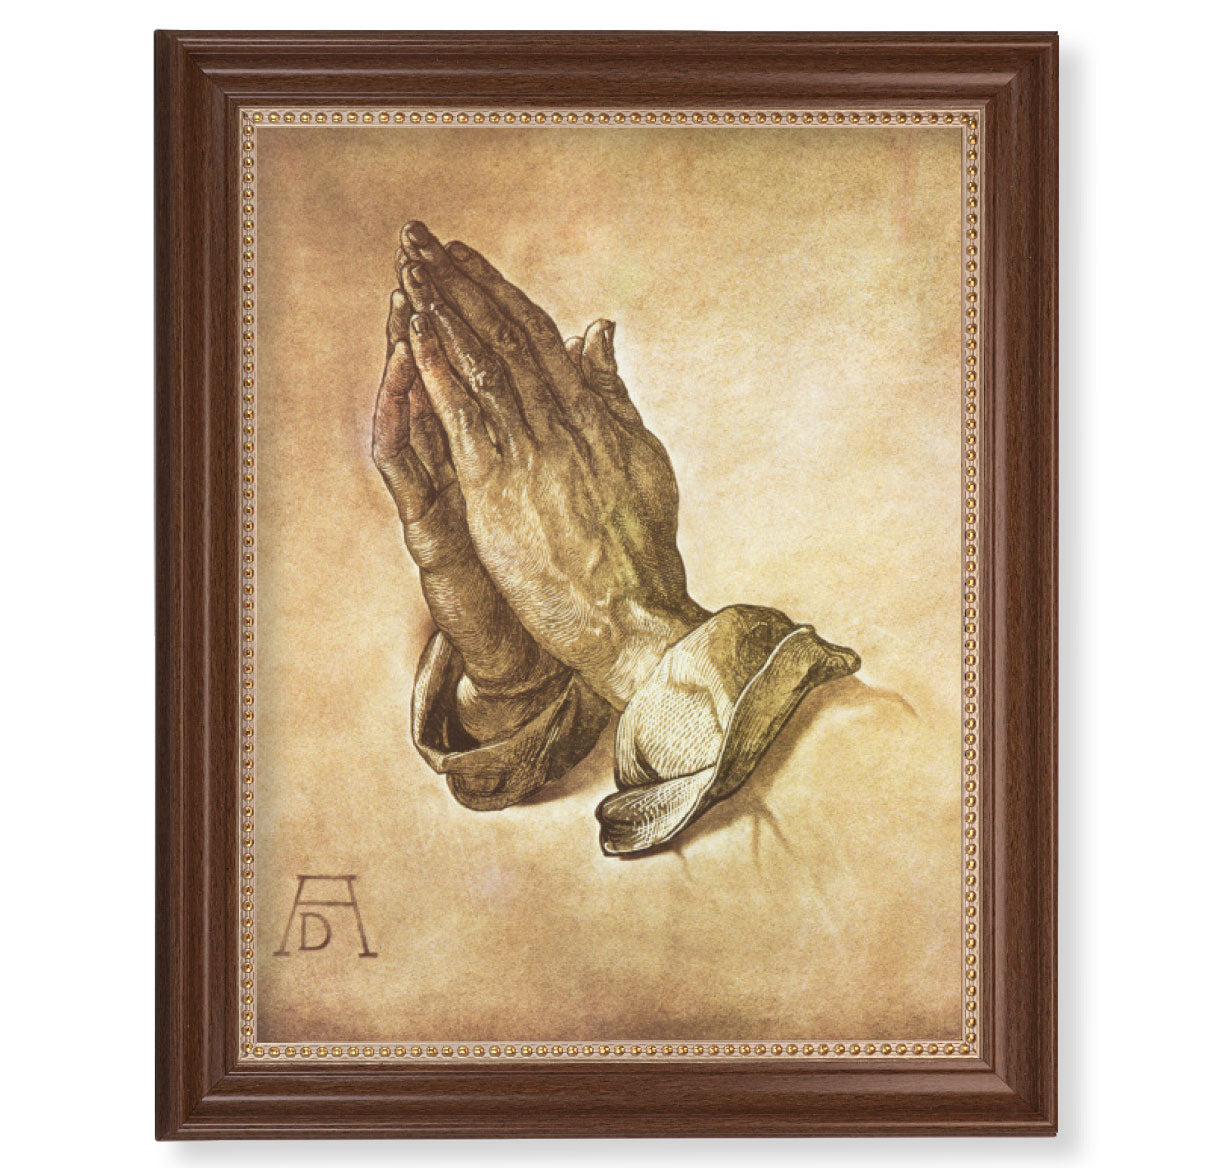 Praying Hands Picture Framed Wall Art Decor Extra Large, Classic Dark Walnut Finished Frame with Gold Beaded Lip